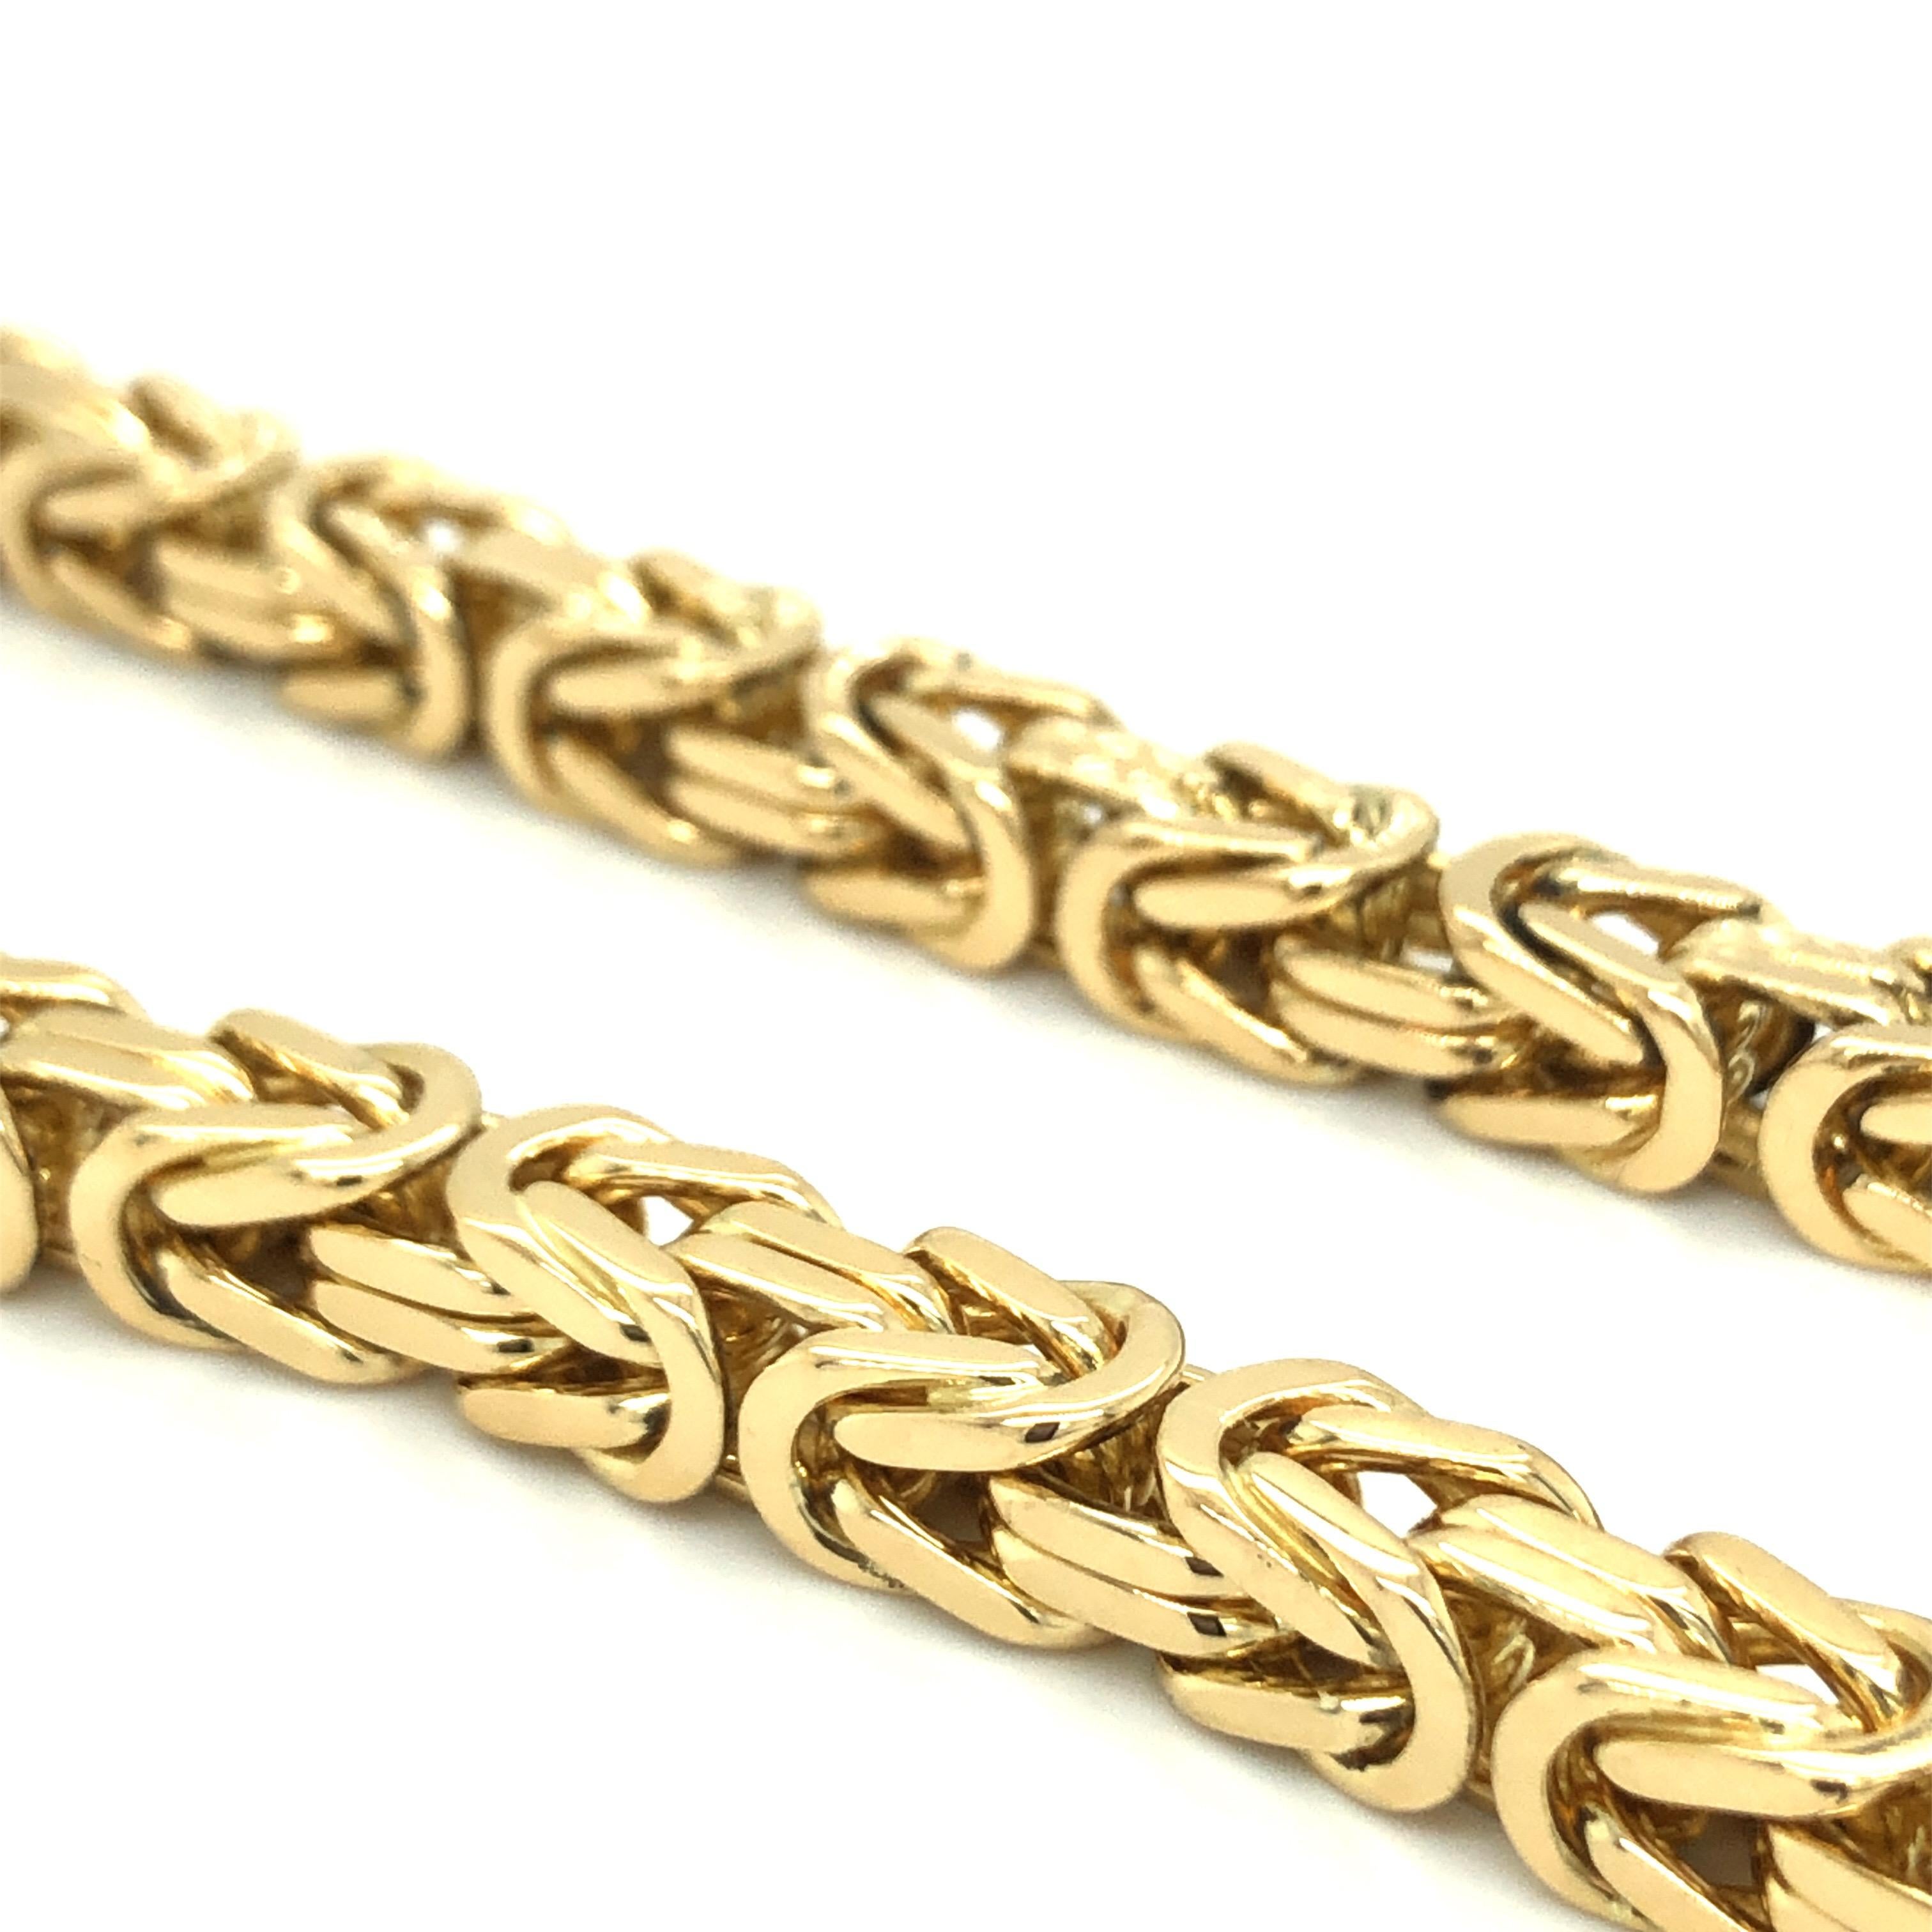 Bold 18 karat yellow gold Byzantine chain necklace by Bucherer.
This statement necklace is supple, flexible and drapes well. It is very comfortable to wear in spite of its weight. The necklace fastens with a secure push clasp, which is disguised